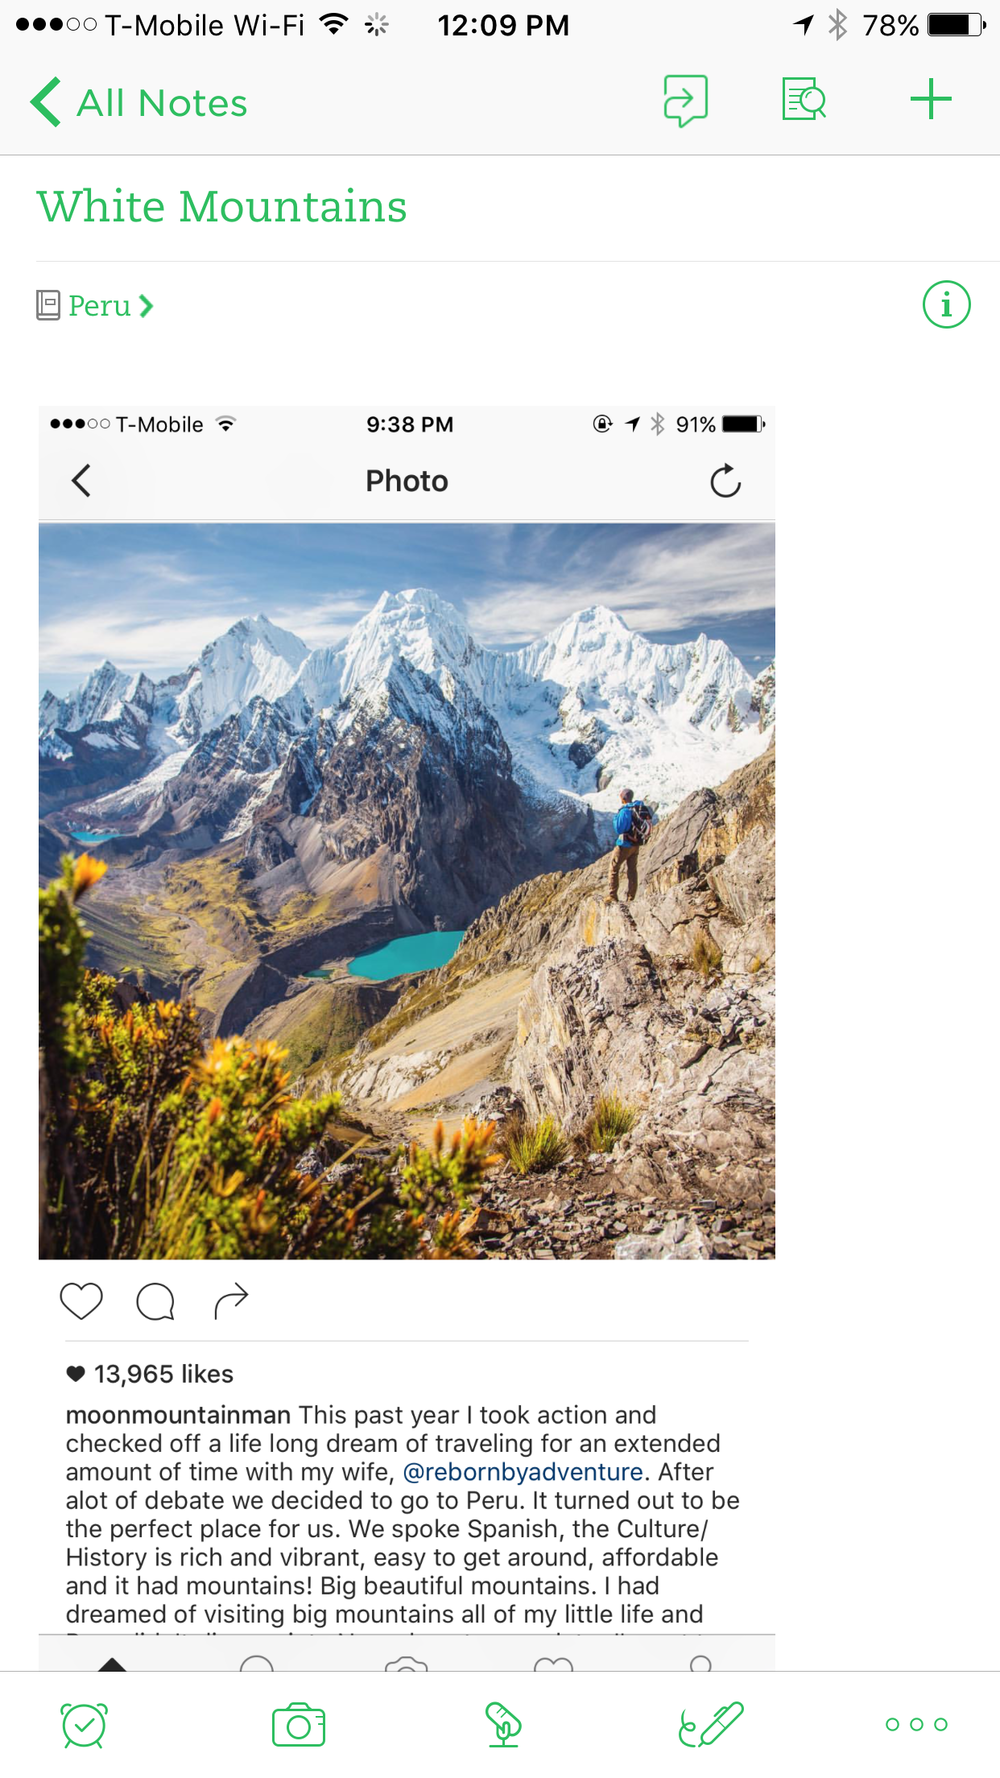 Screenshot of Instagram user @moonmountainman, follow him to see some epic locations!